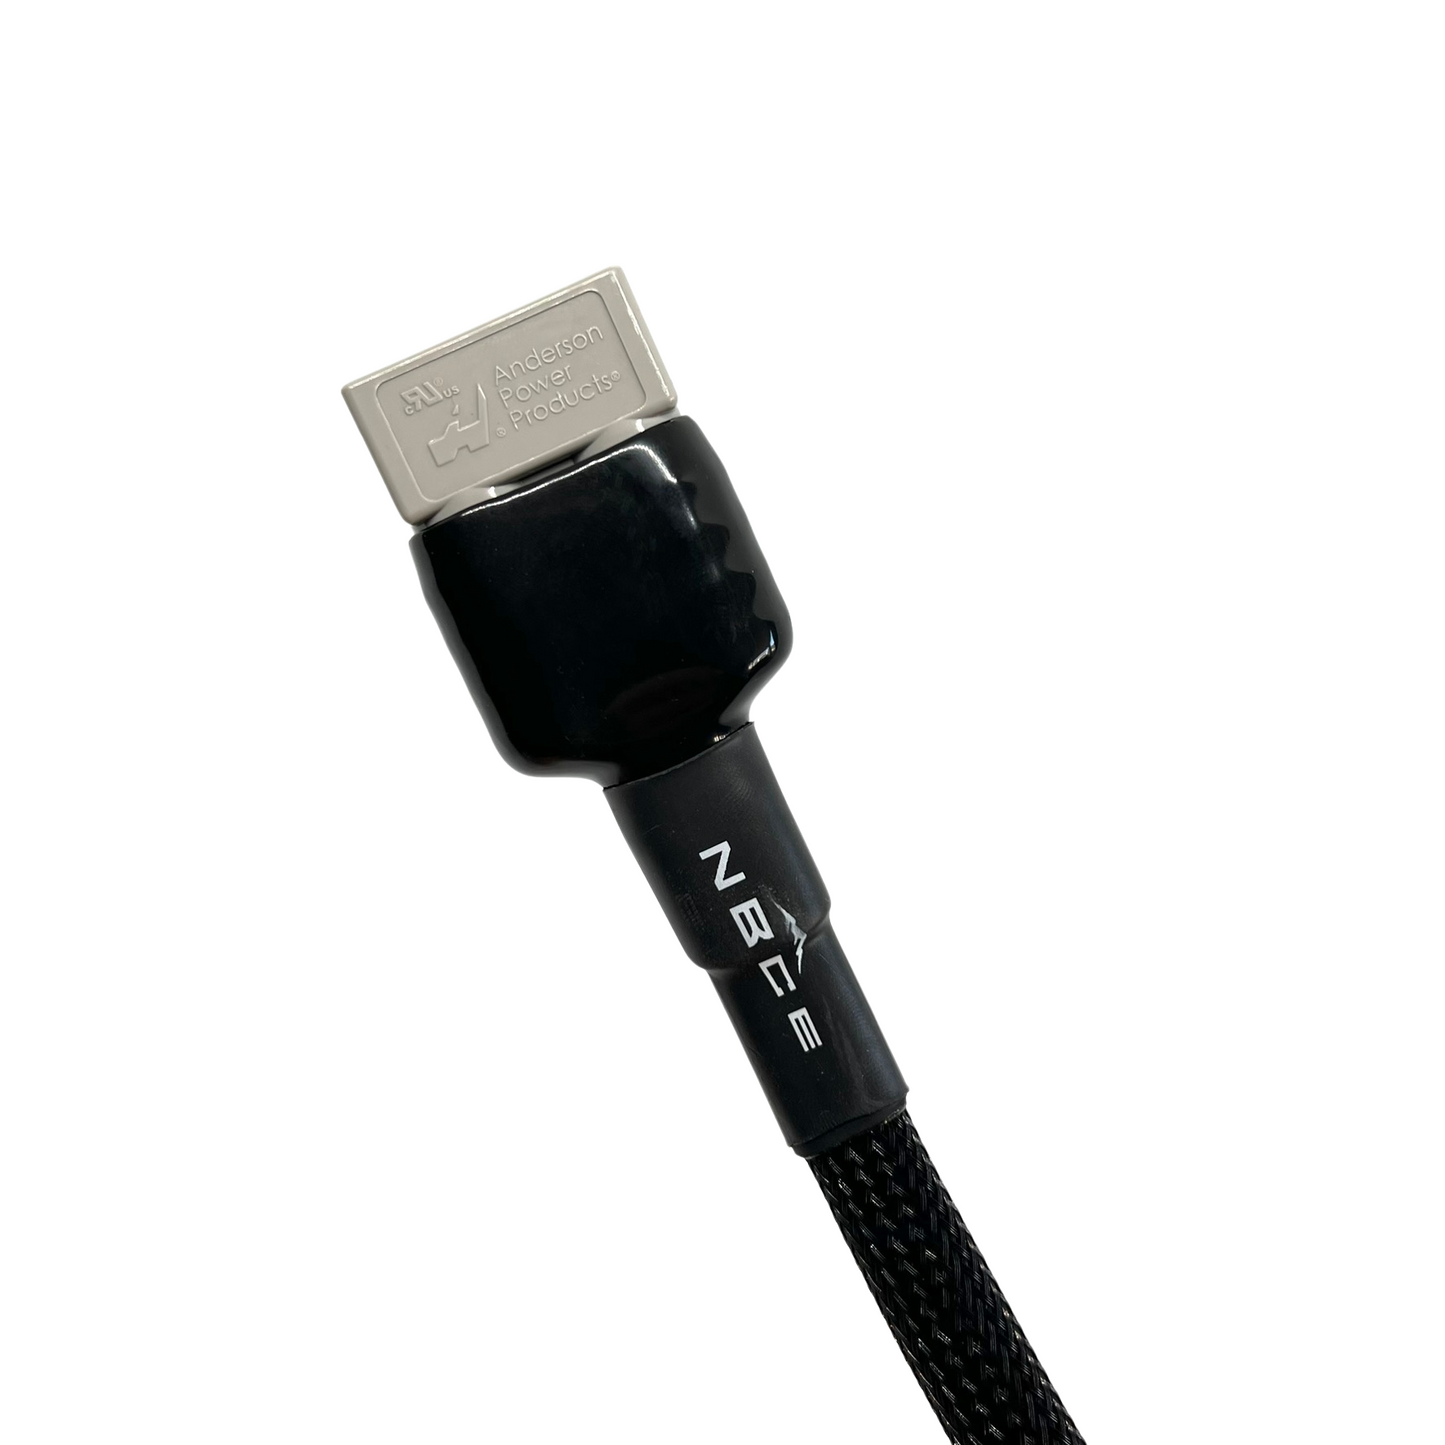 Sleeved Anderson Cable - 6 AWG (13.50mm2)